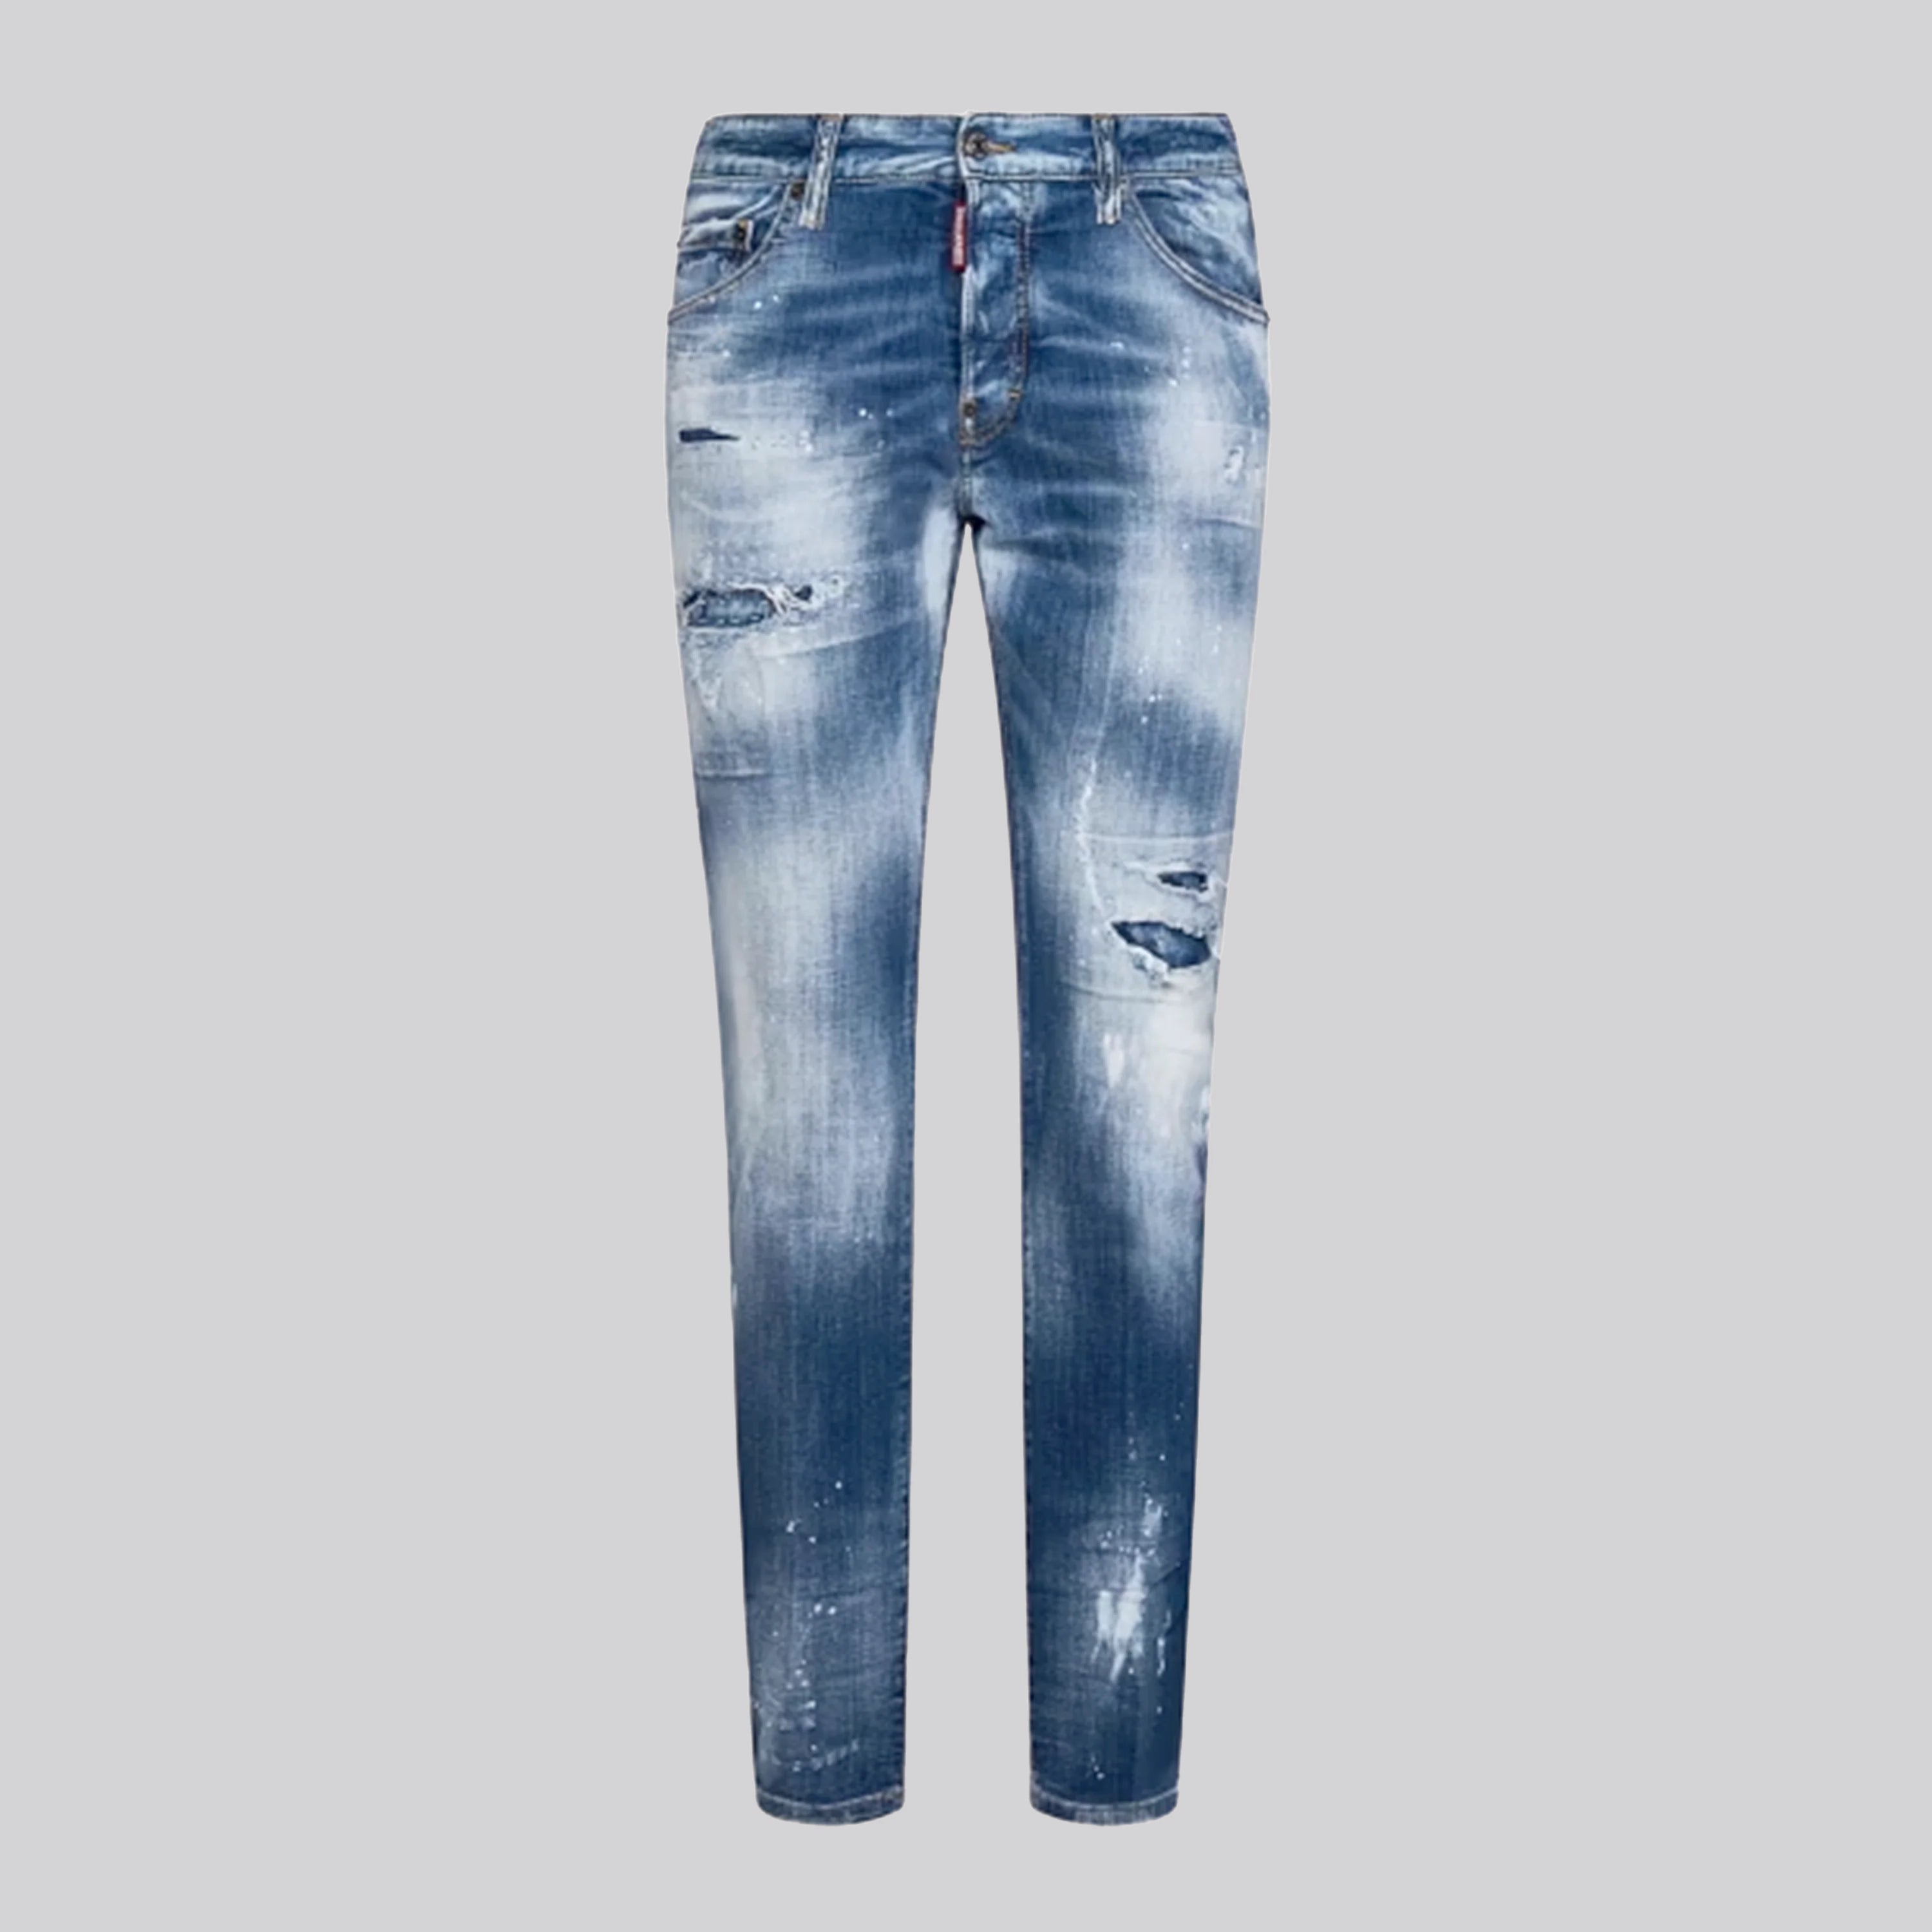 Jeans Denim Dsquared2 Cool Guy Rippeds